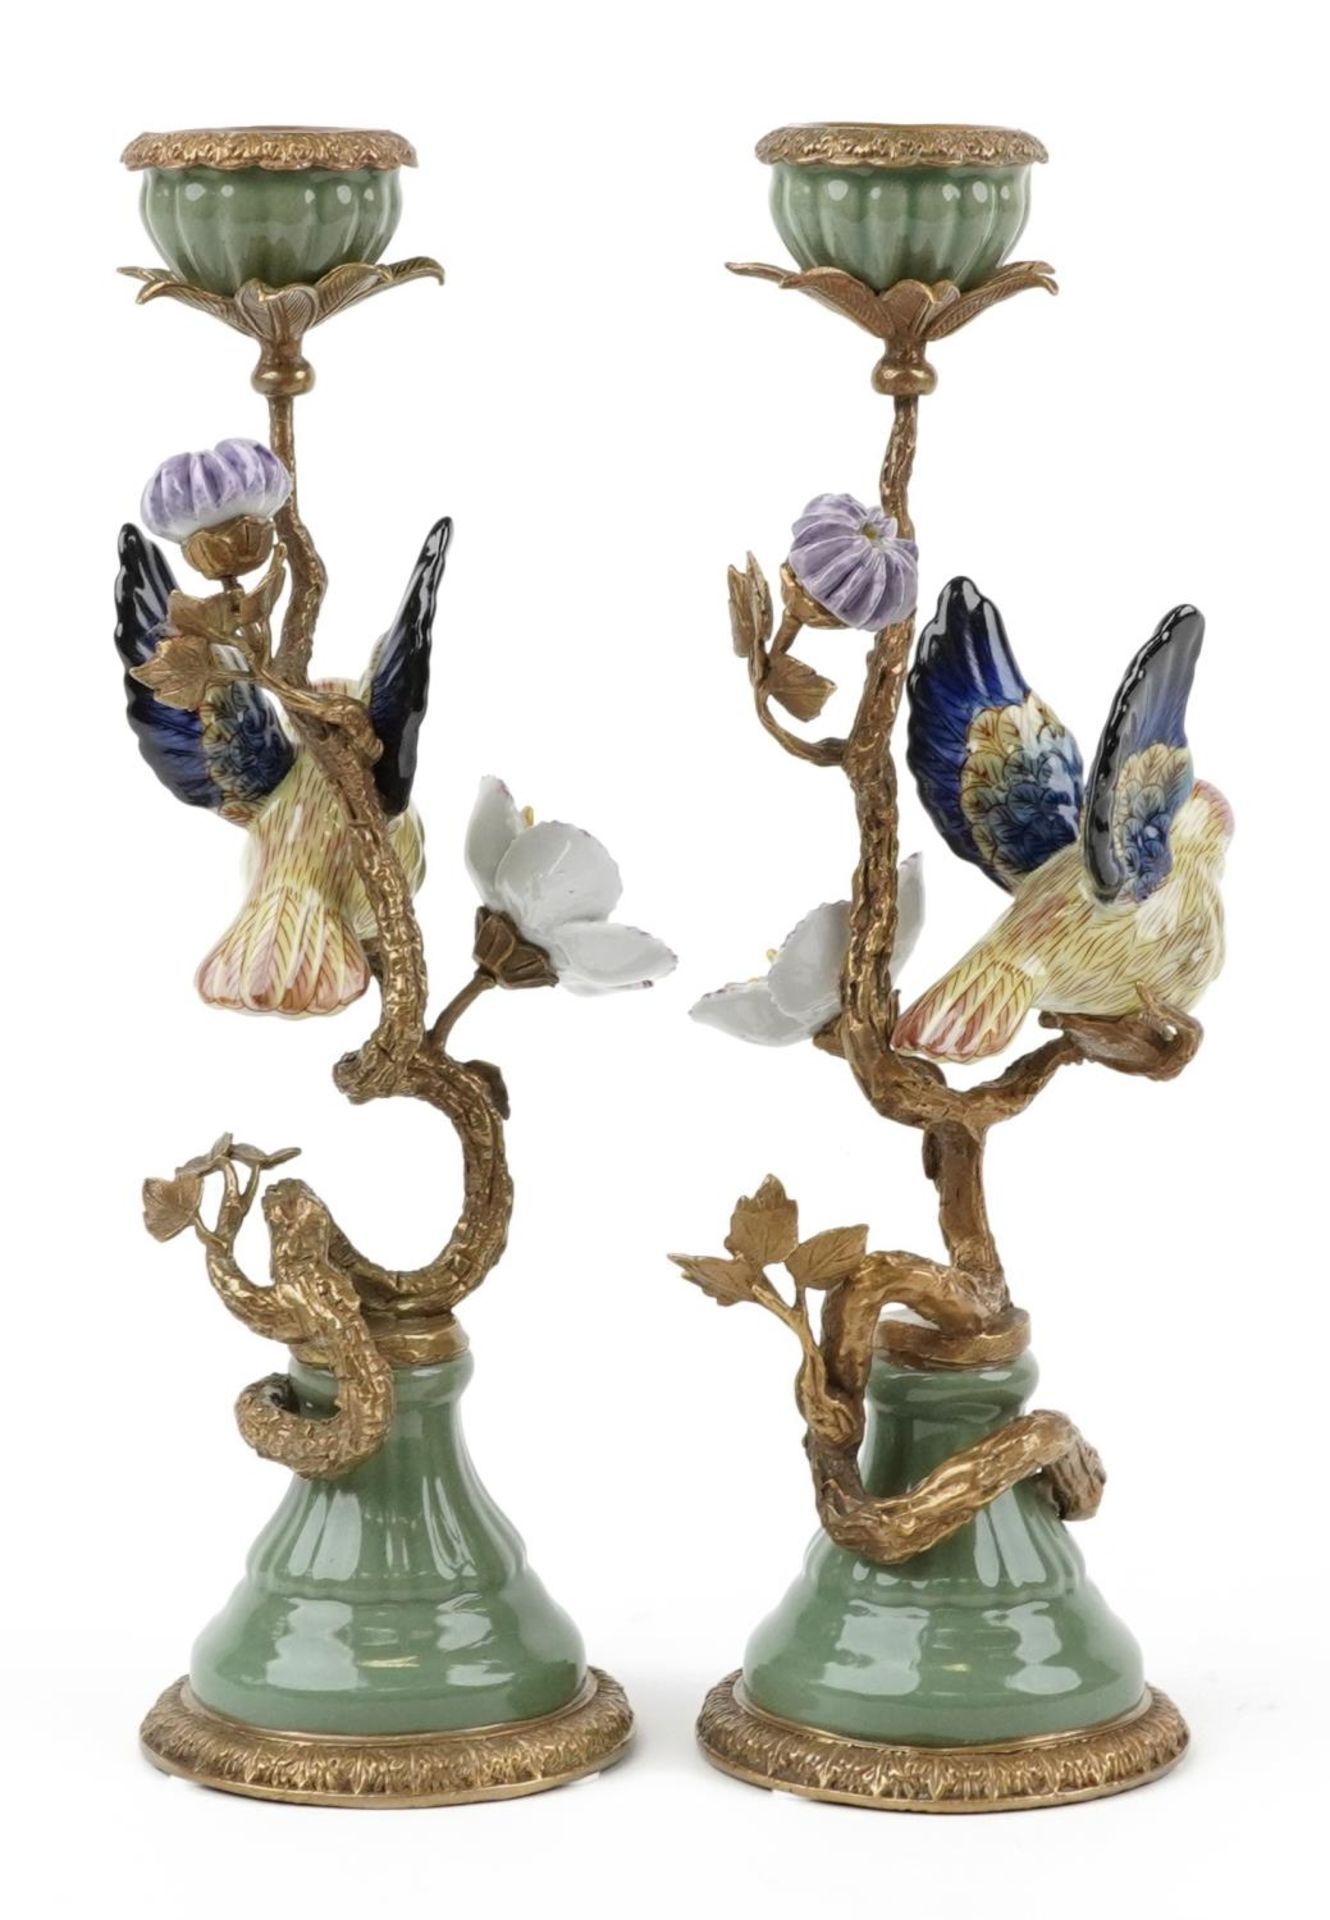 Pair of antique style porcelain and bronze candlesticks in the form of a birds on branches with - Image 2 of 4